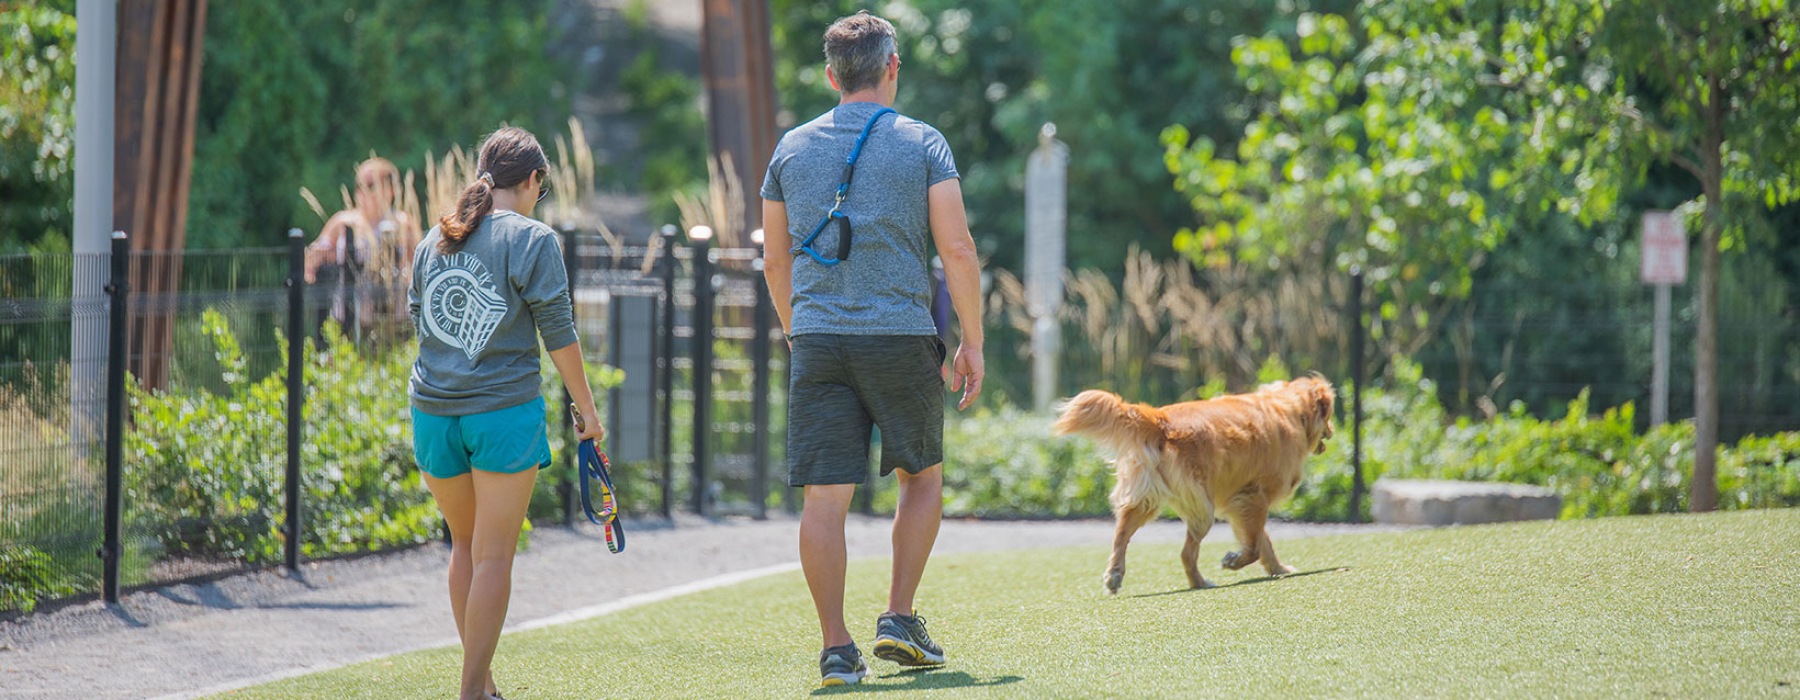 Your new neighborhood is a pet friendly community